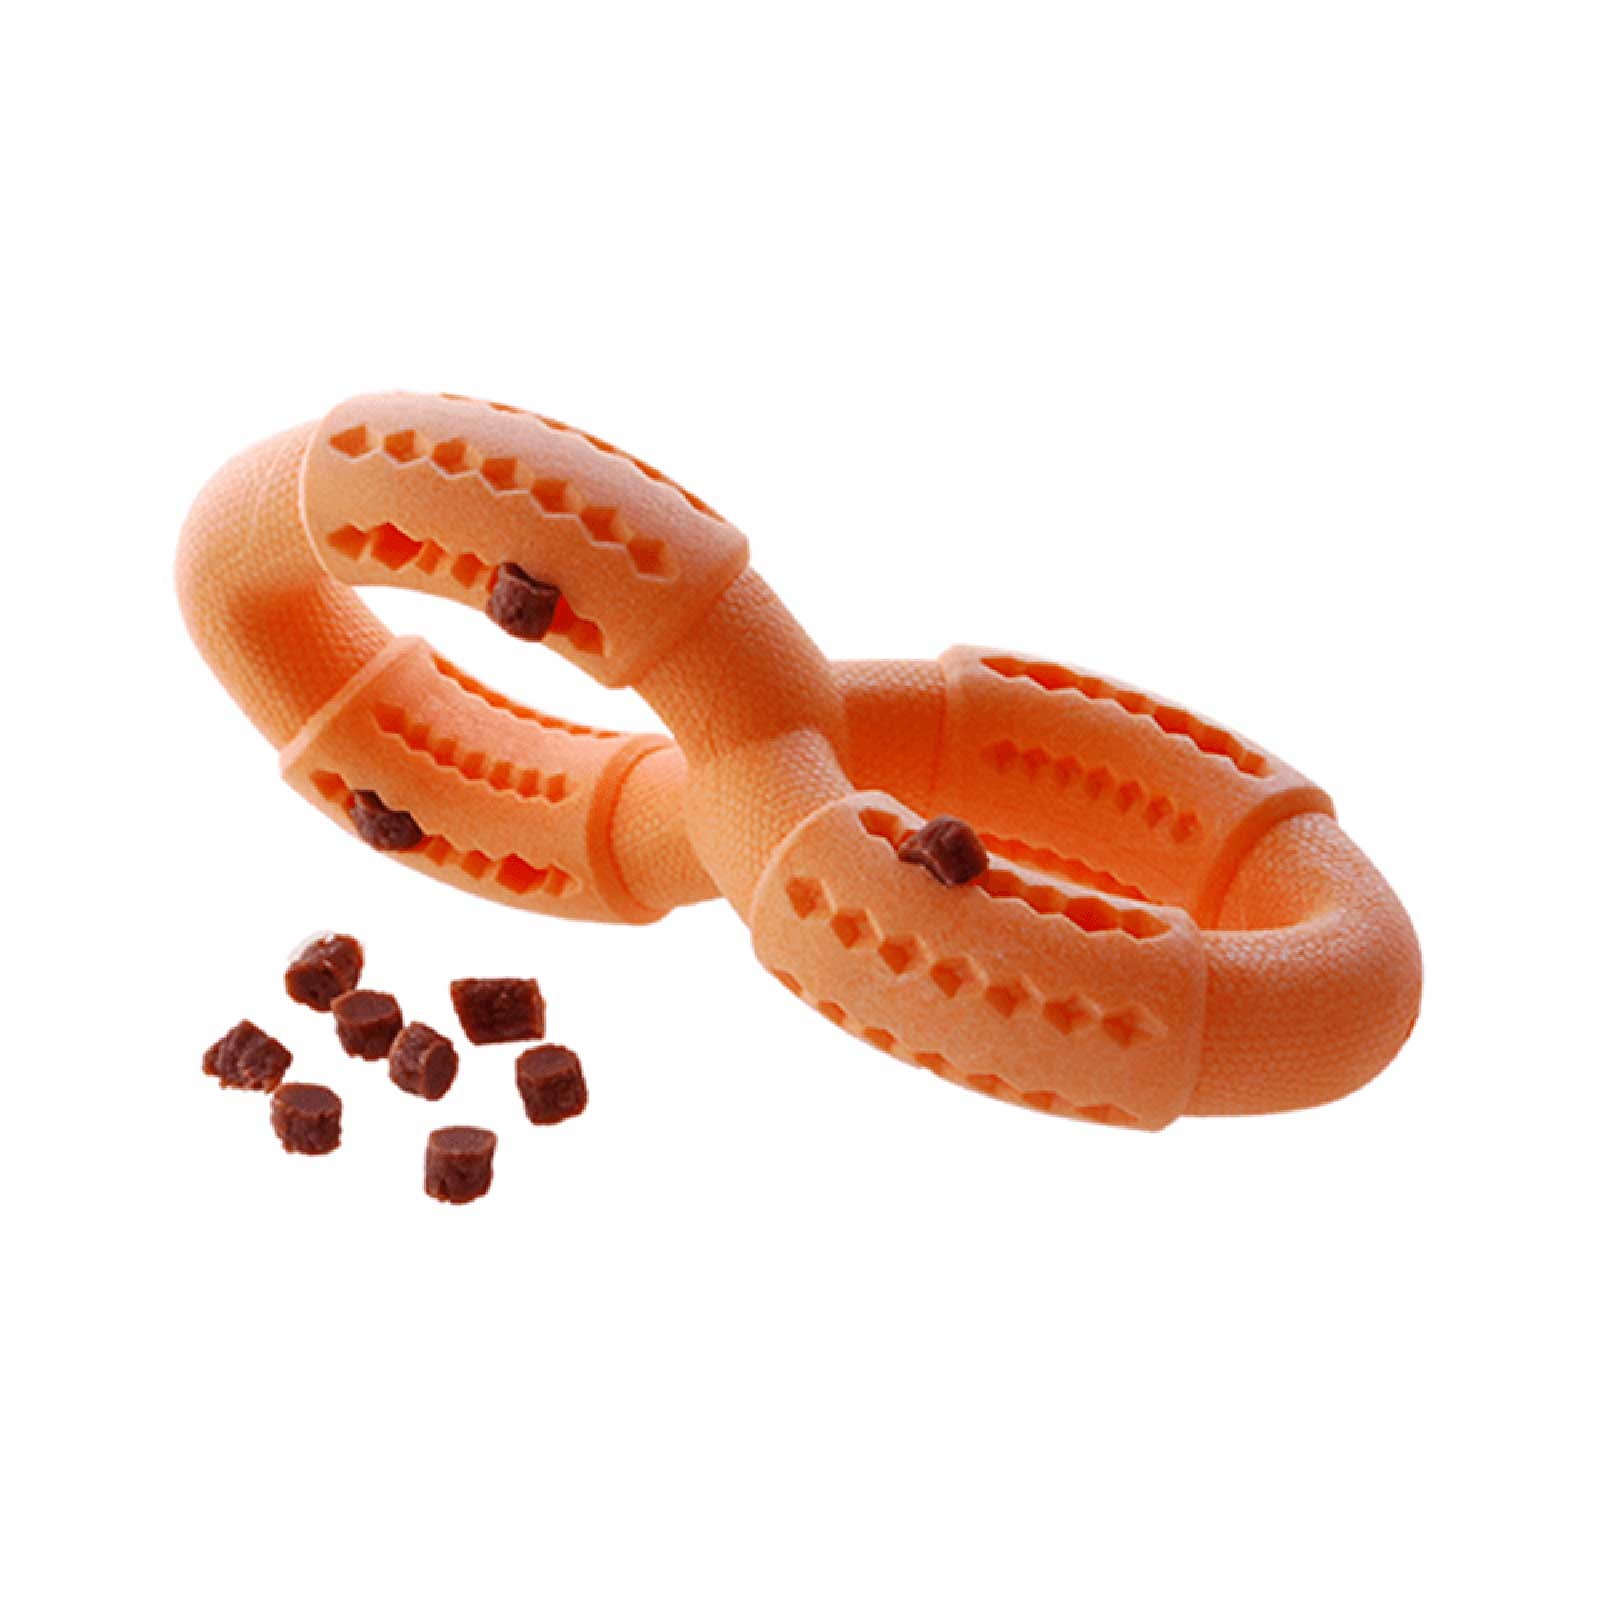 Ruff Play Dental Dog Toy Treat Double Ring